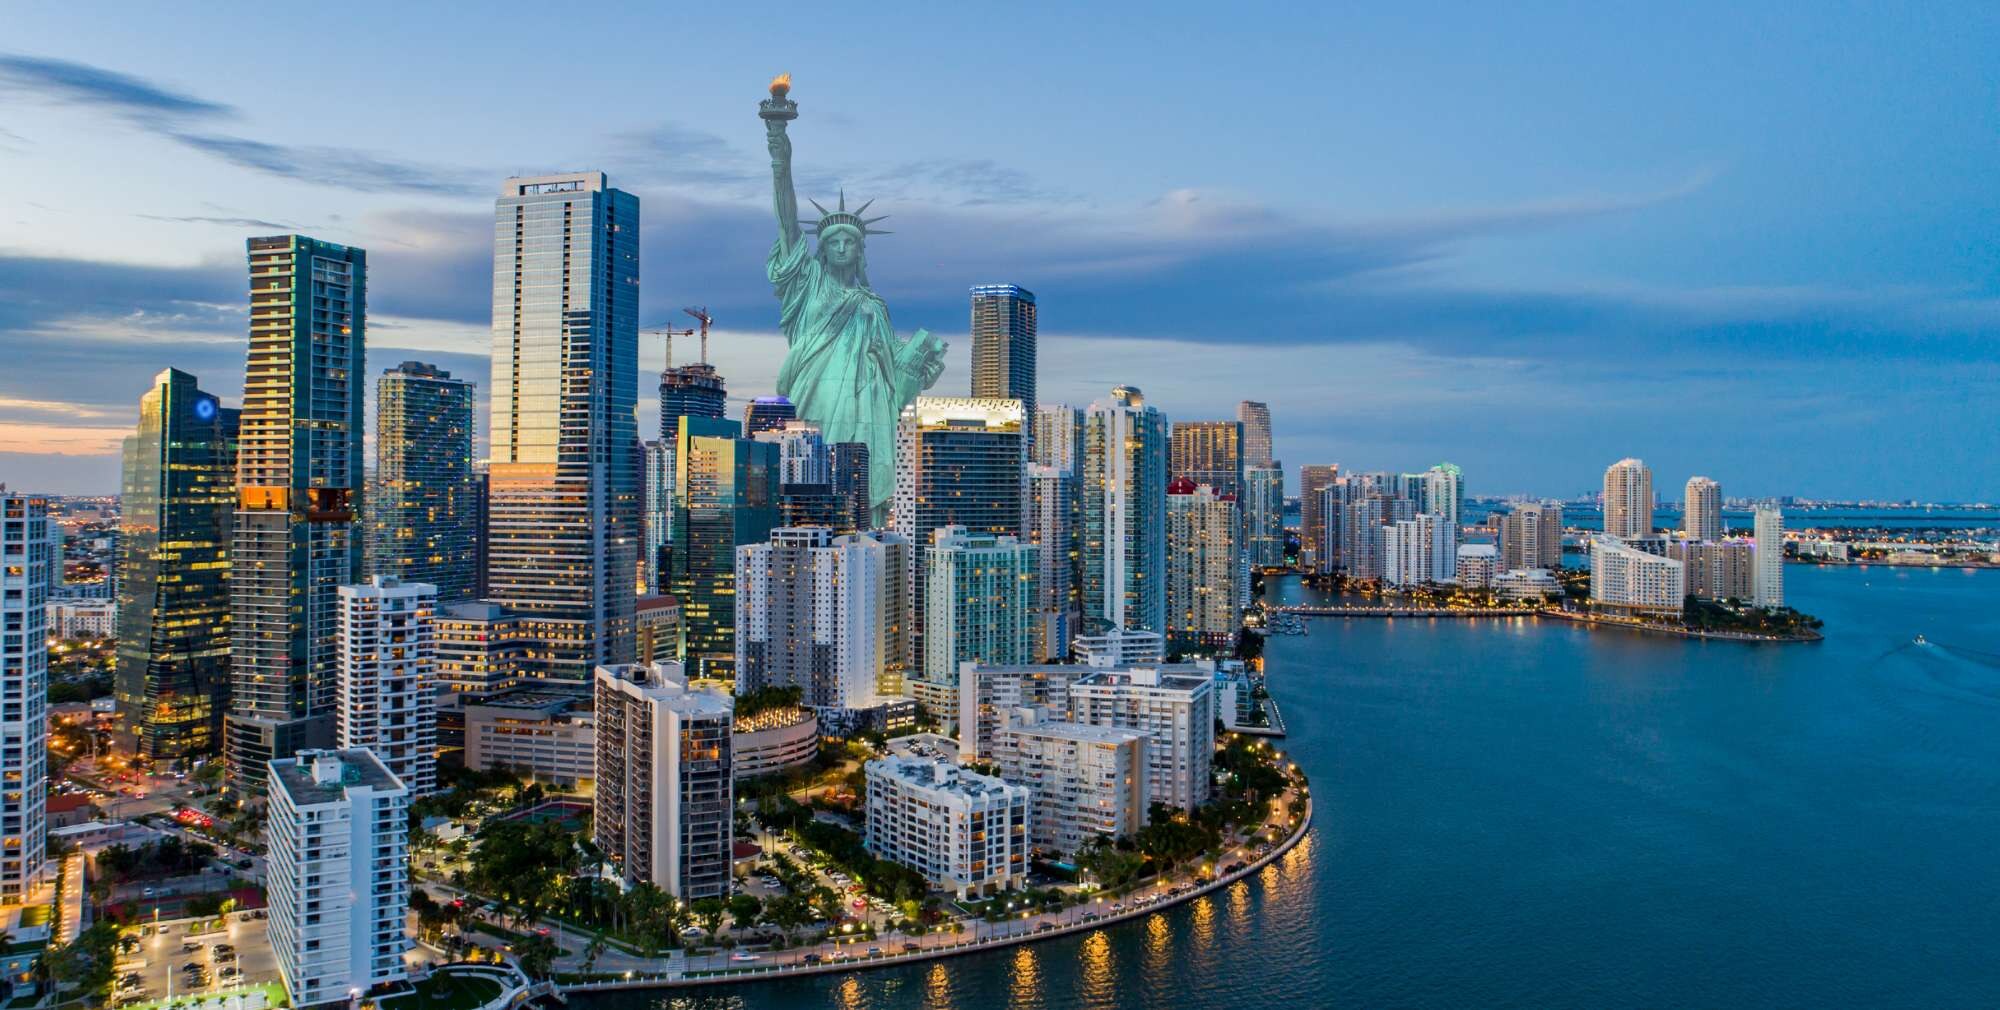 The Statue of Liberty Elevating the Miami Florida skyline